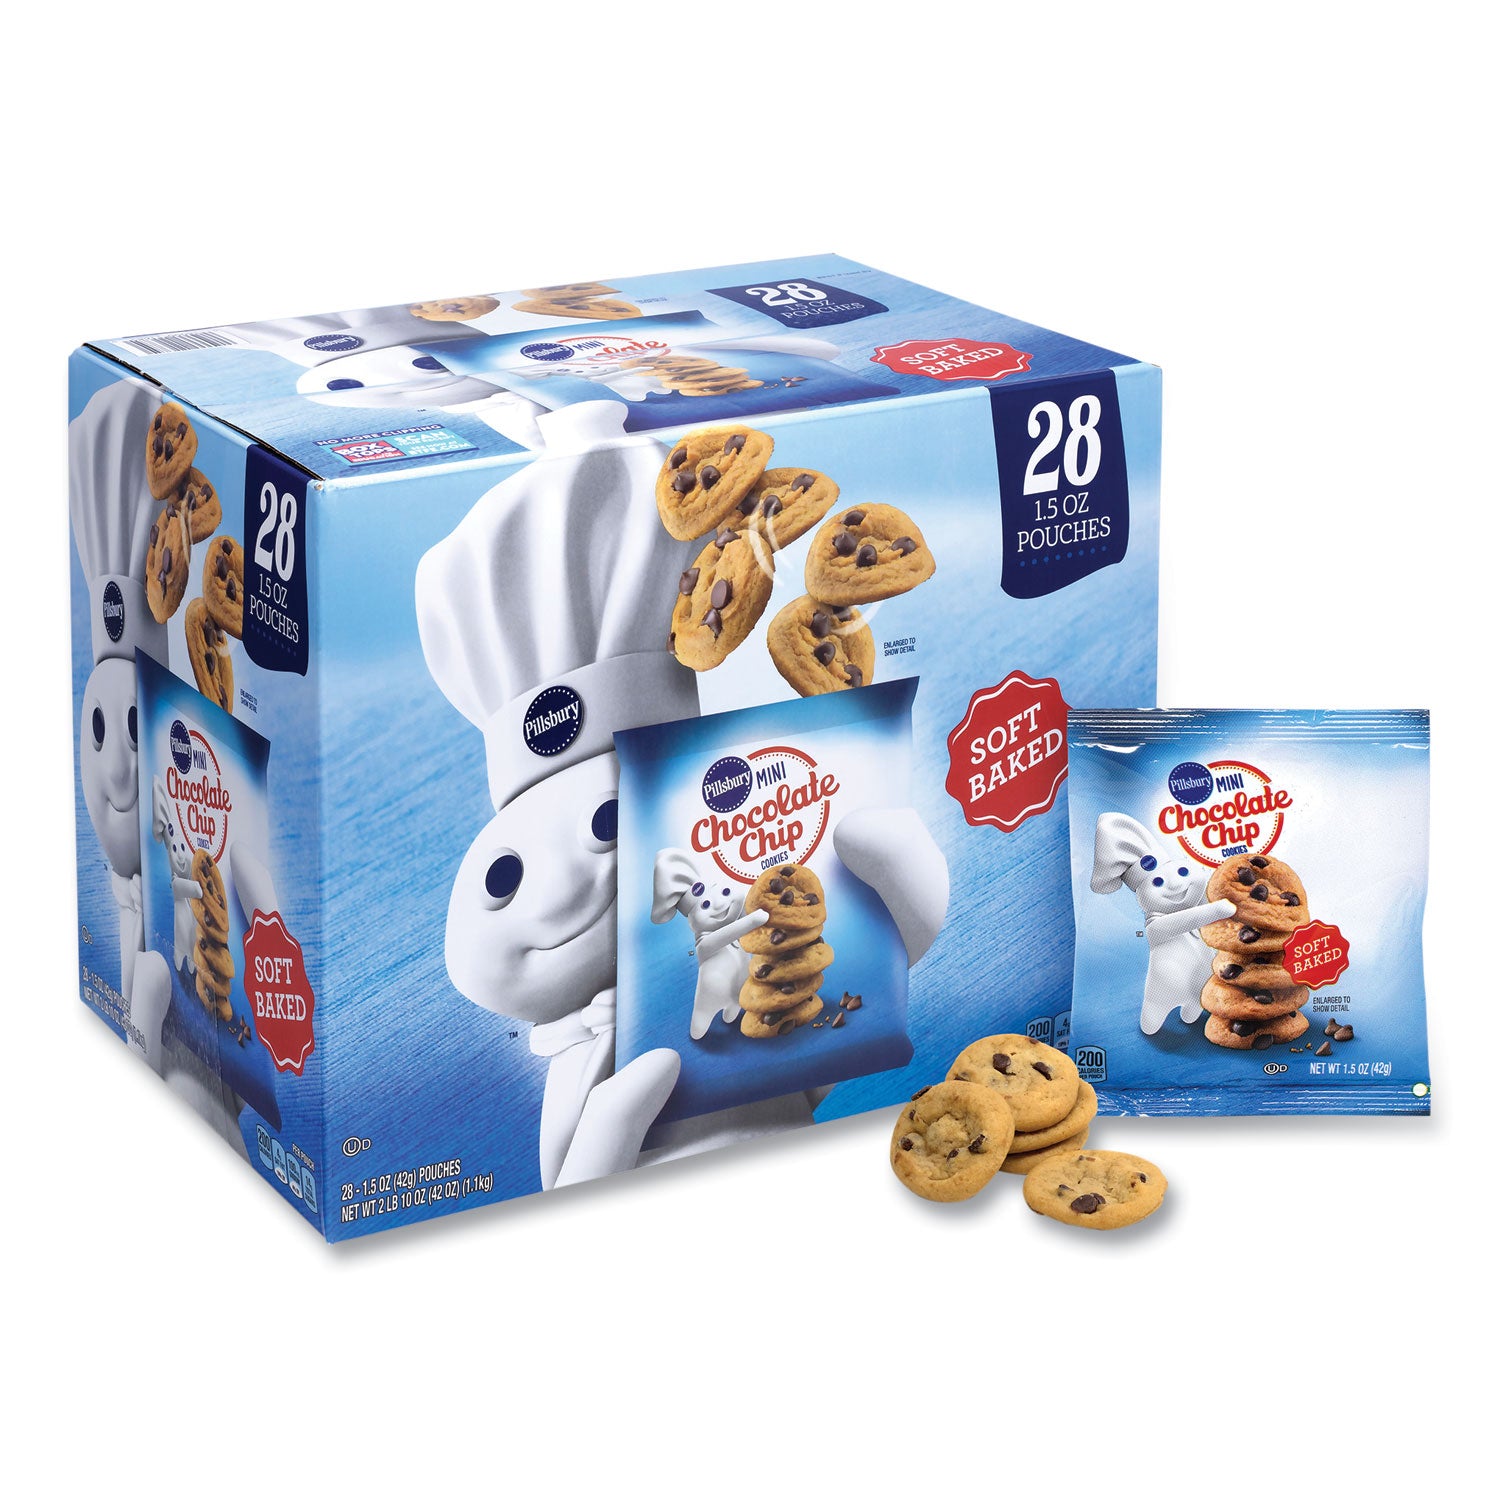 soft-baked-mini-chocolate-chip-cookies-15-oz-pouch-28-pack-ships-in-1-3-business-days_grr22002056 - 1